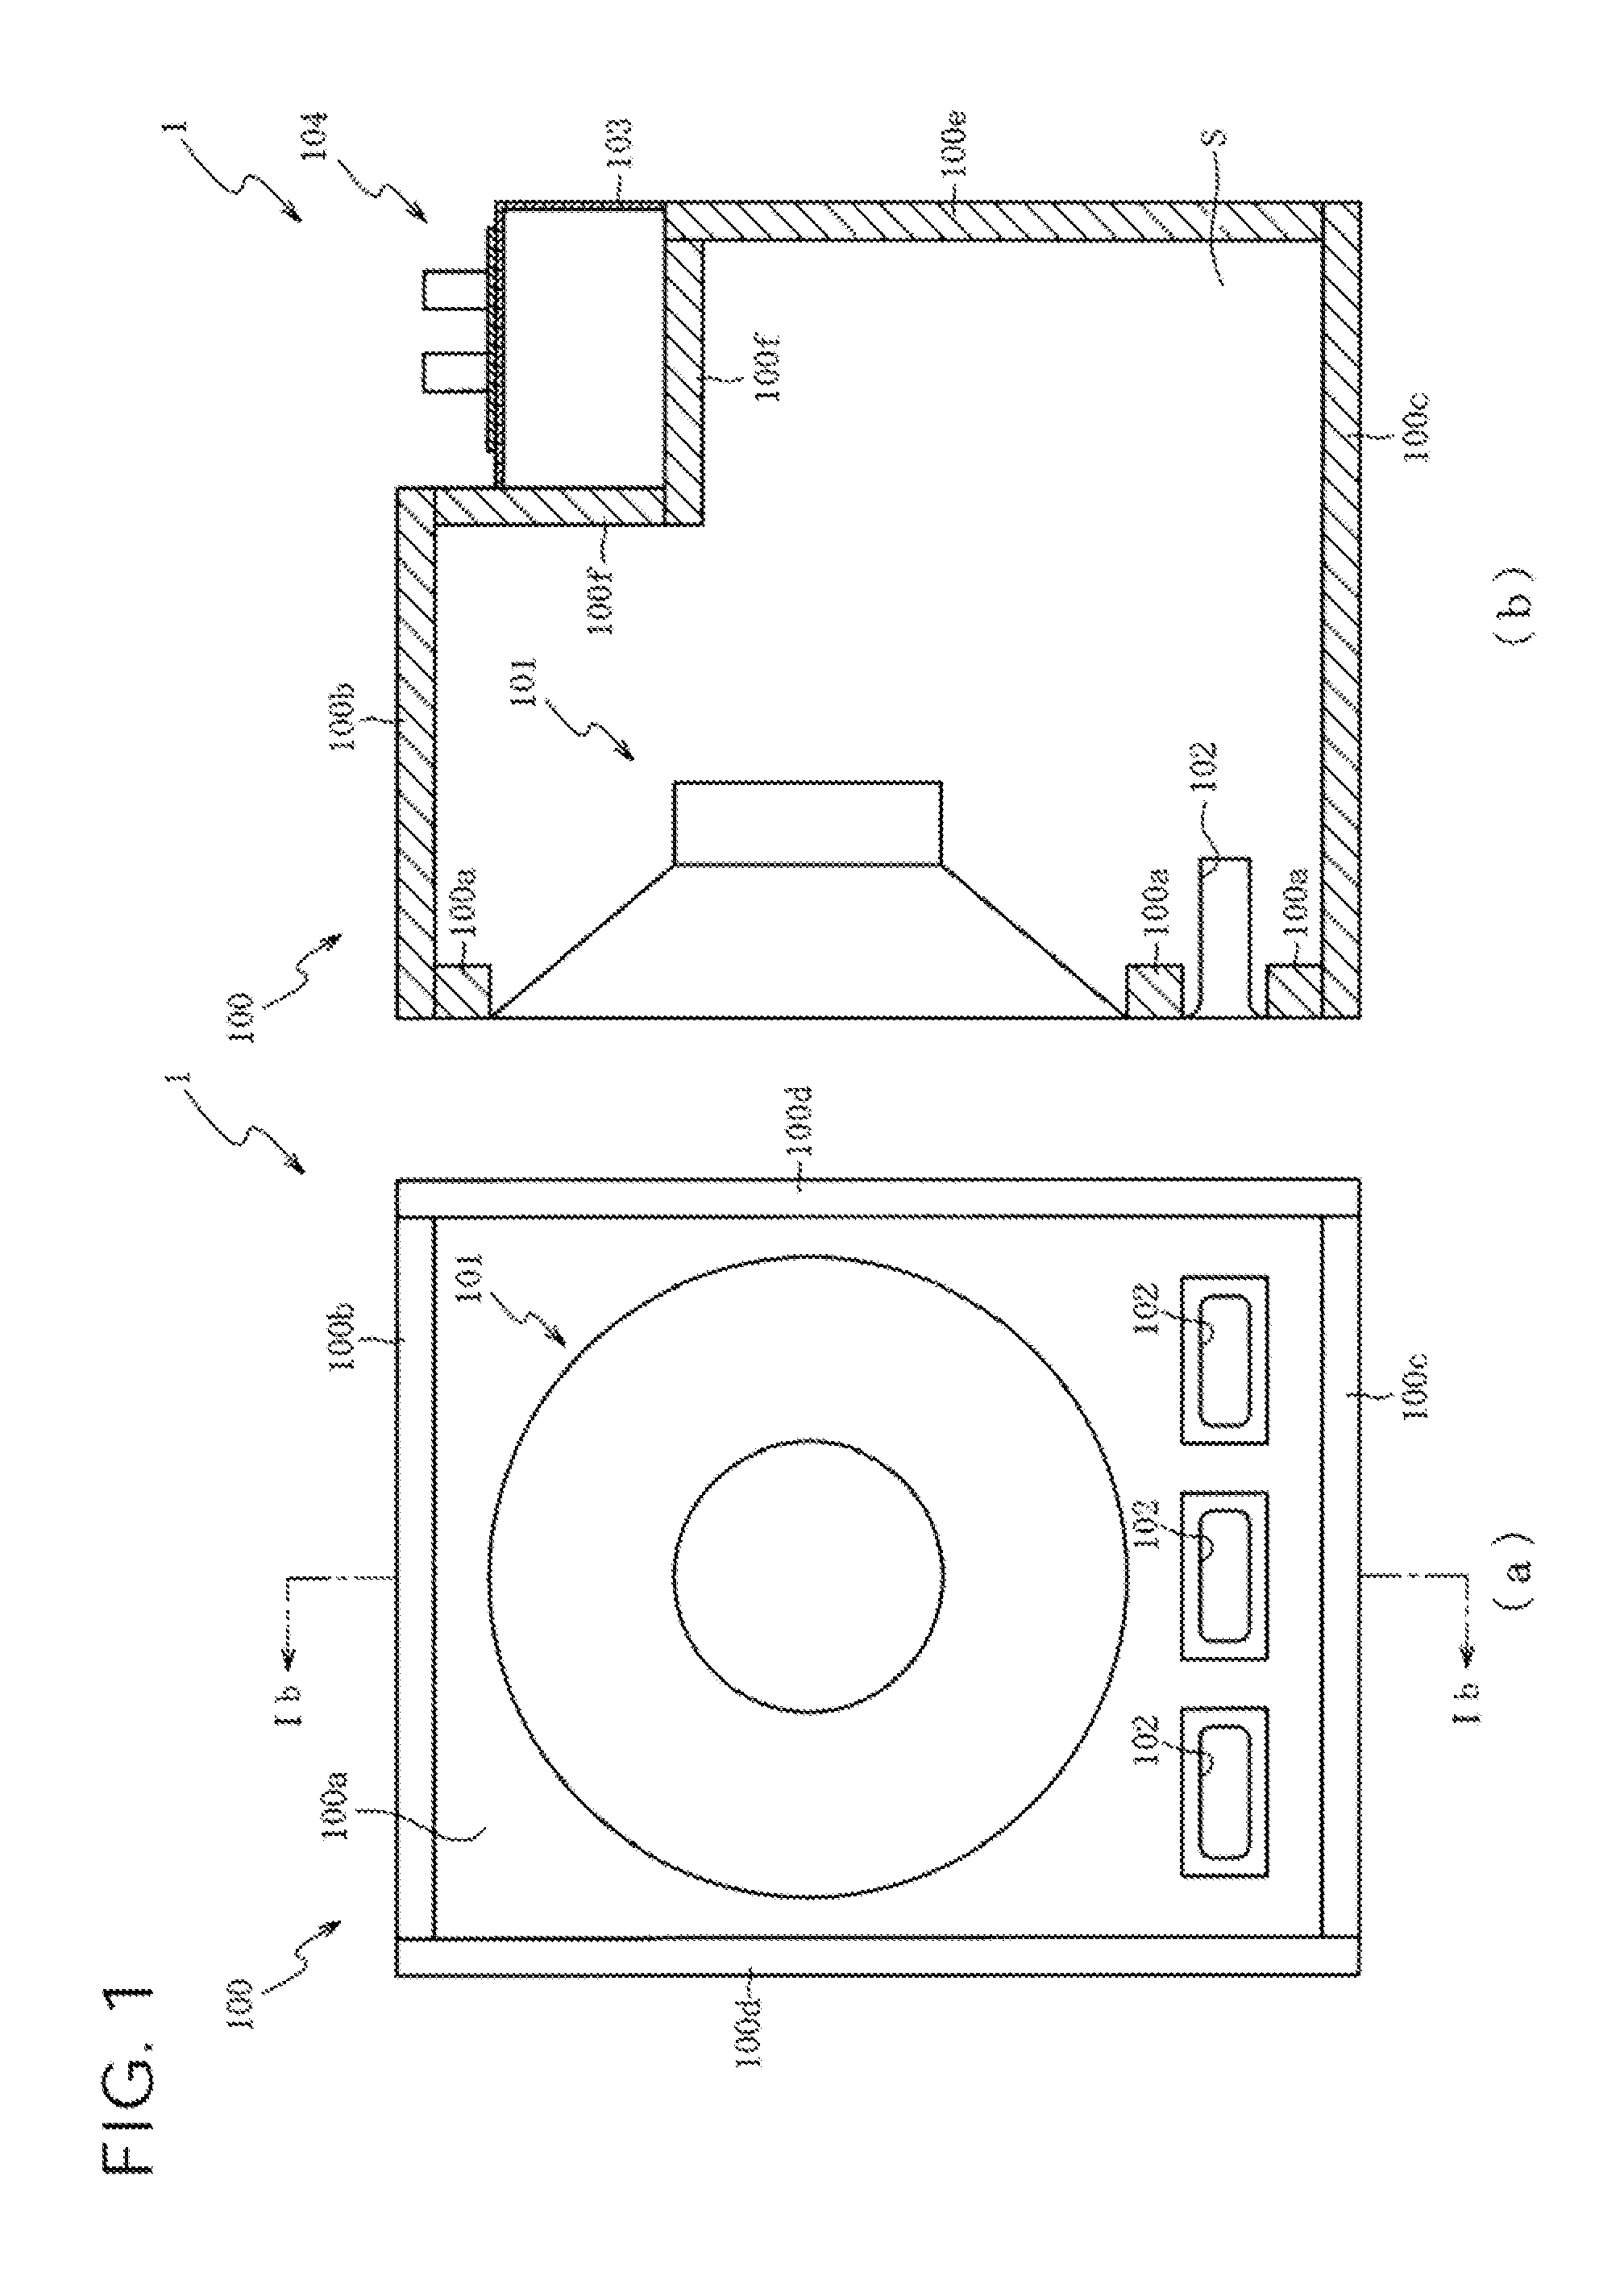 Low-pitched sound enhancement processing apparatus, speaker system and sound effects apparatus and processes